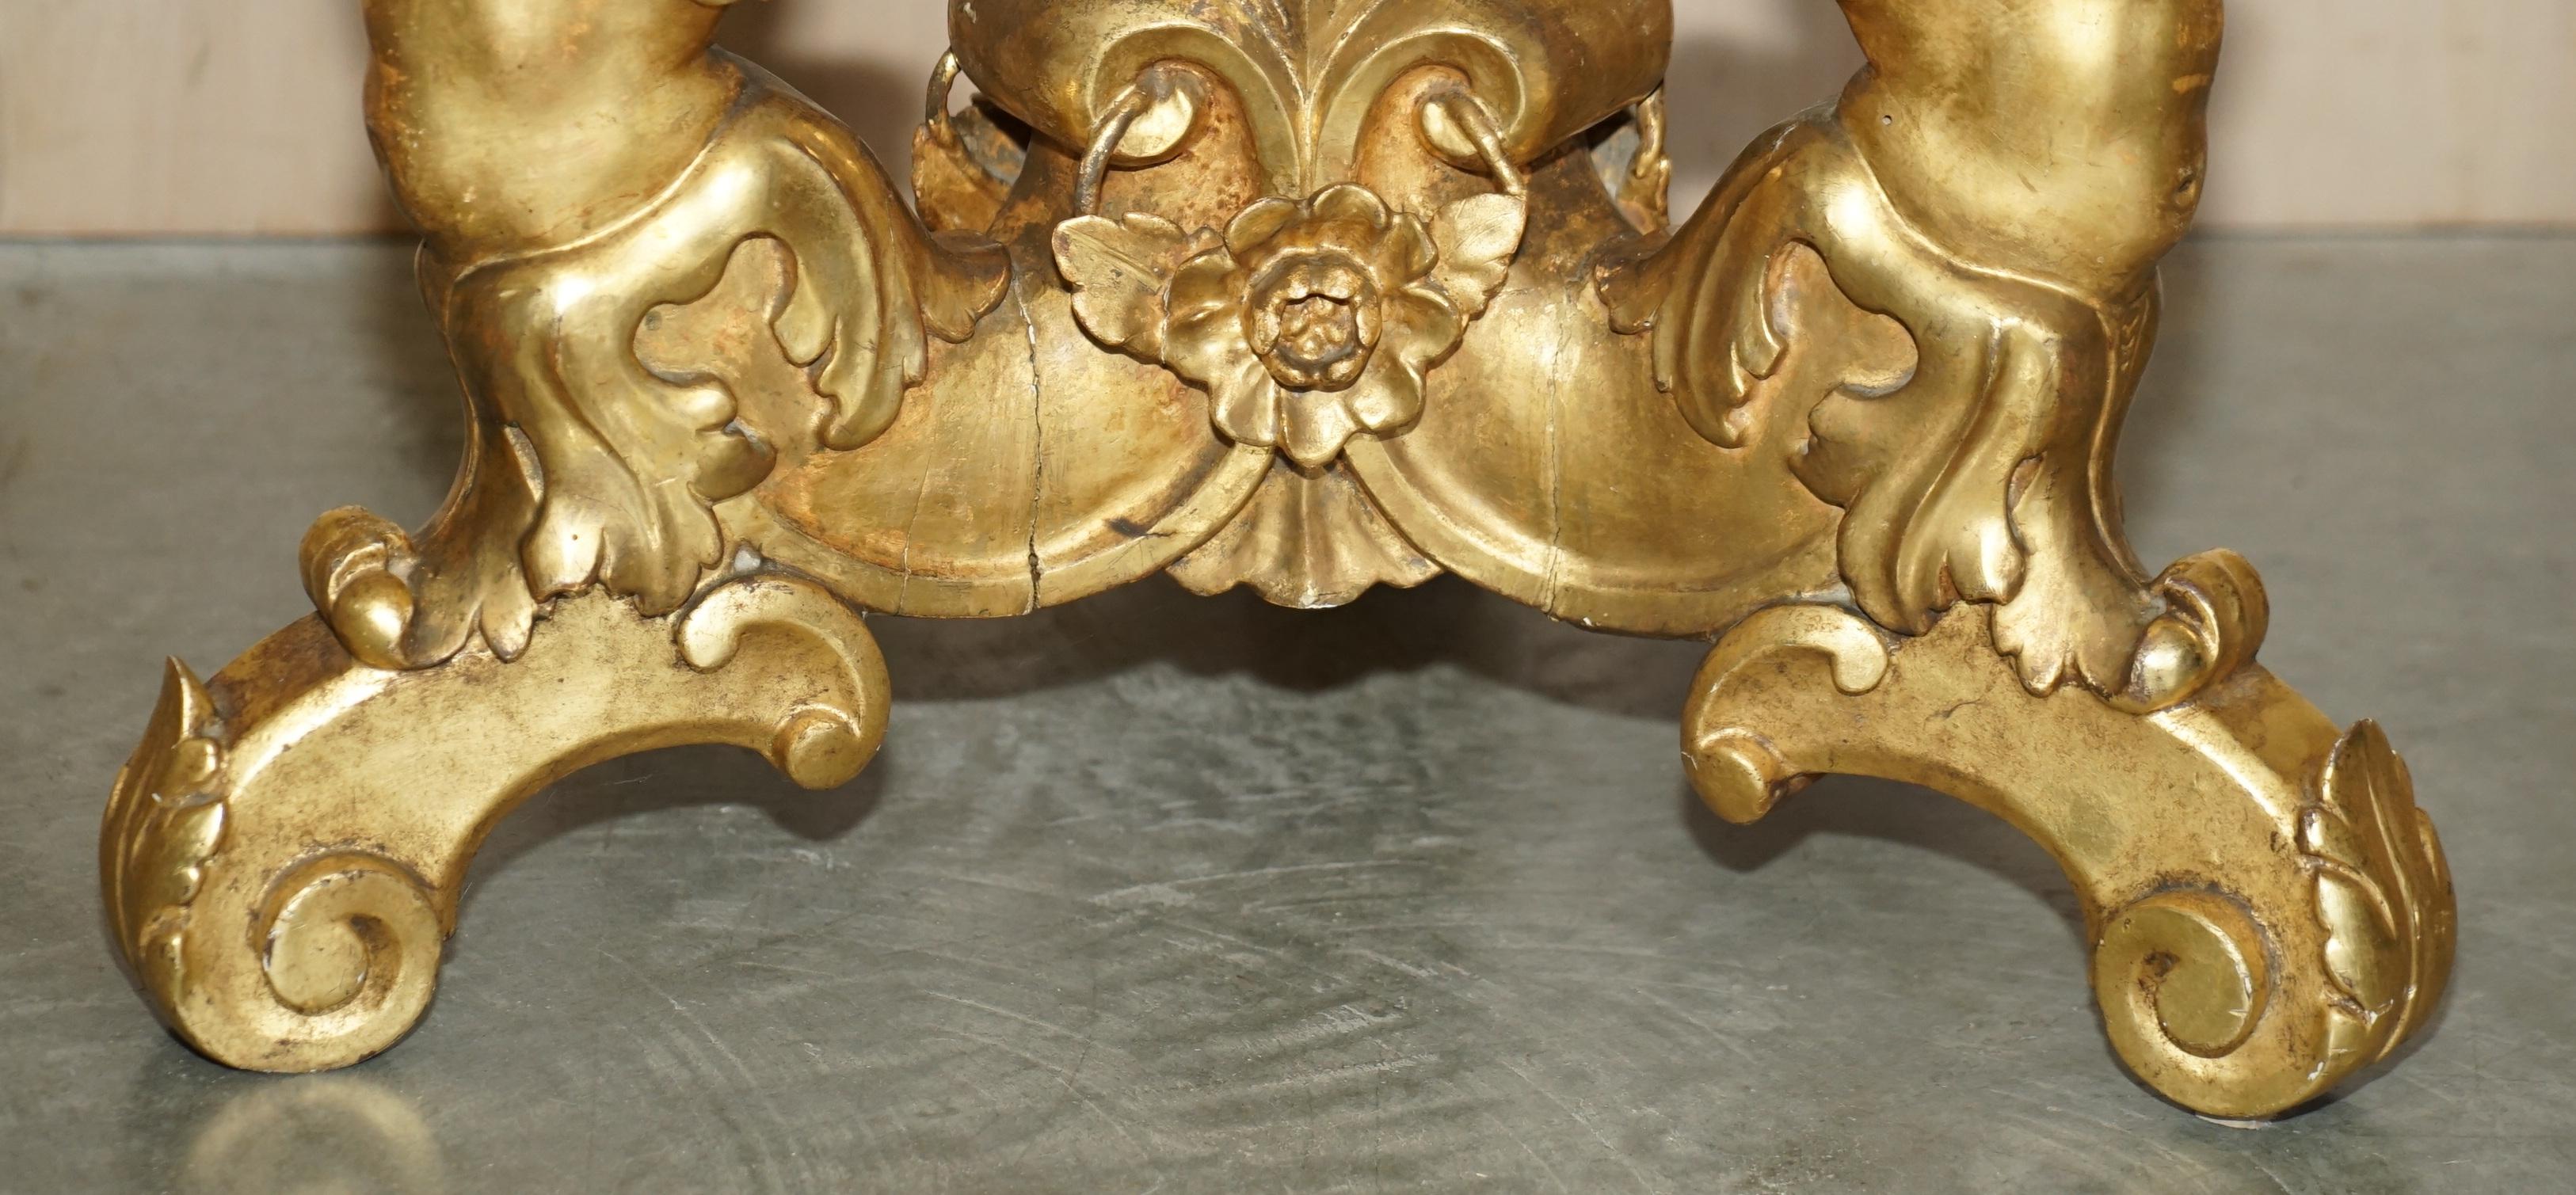 Exquisite Antique French Gold Giltwood Italian Marble Herm Carved Centre Table For Sale 13